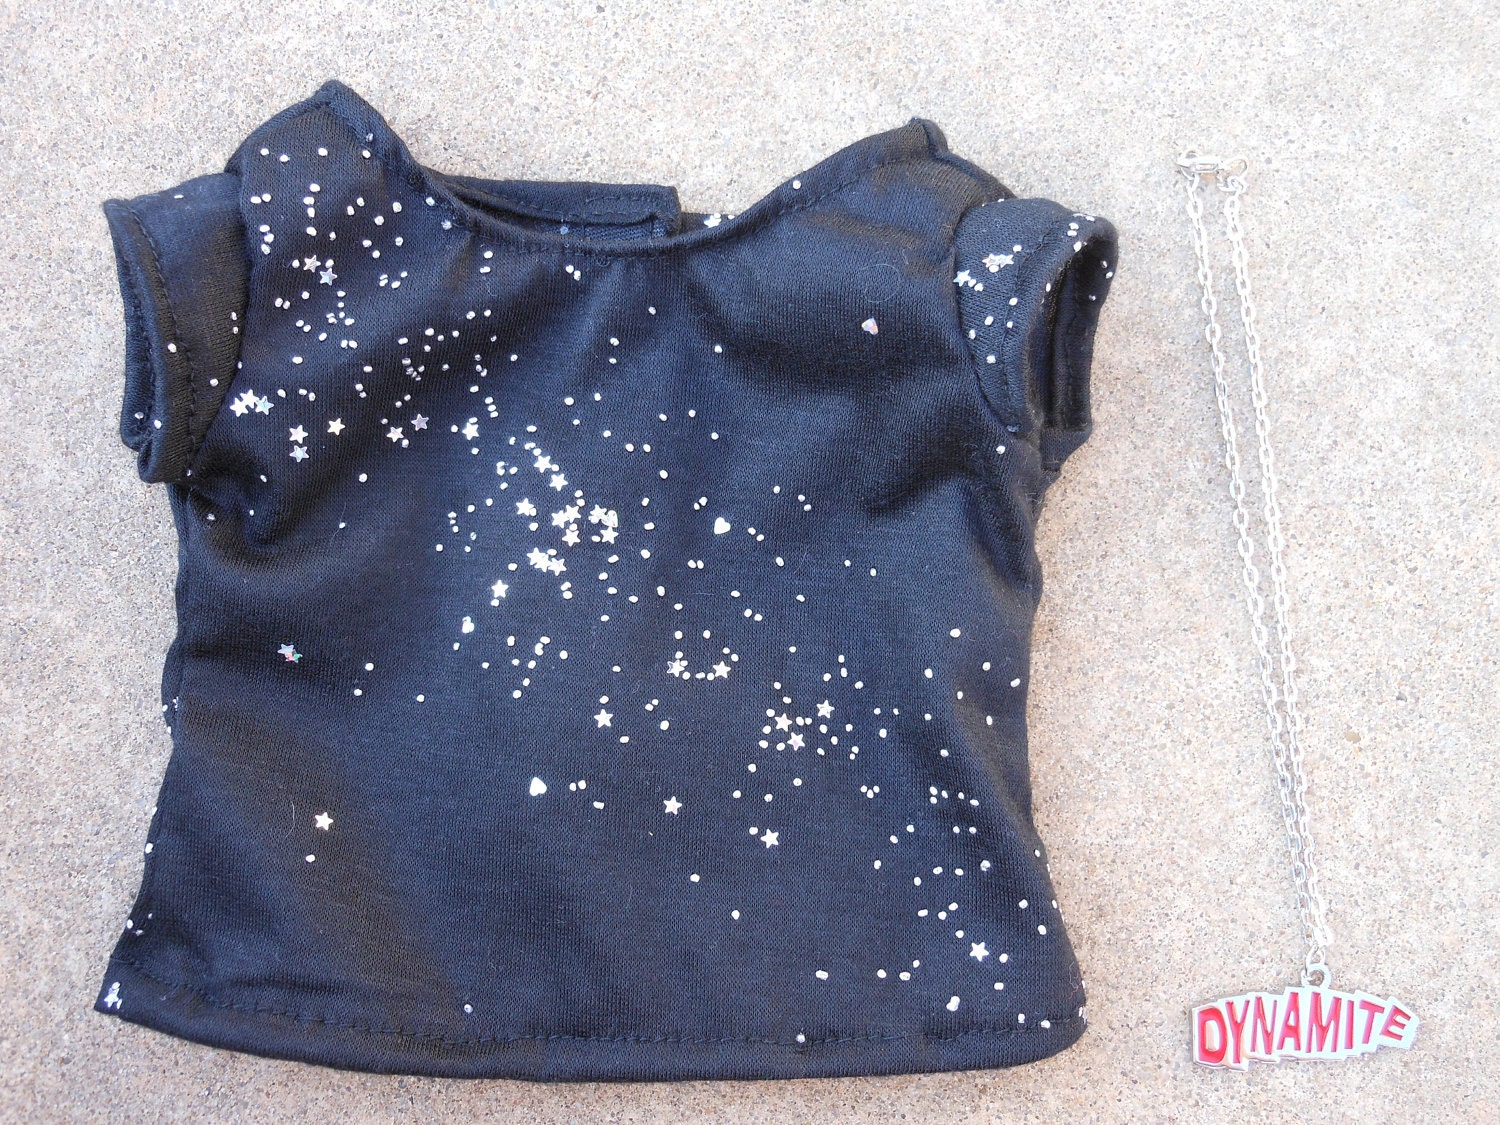 Starry Nights Tee and Dynamite Necklace for American Girl Dolls